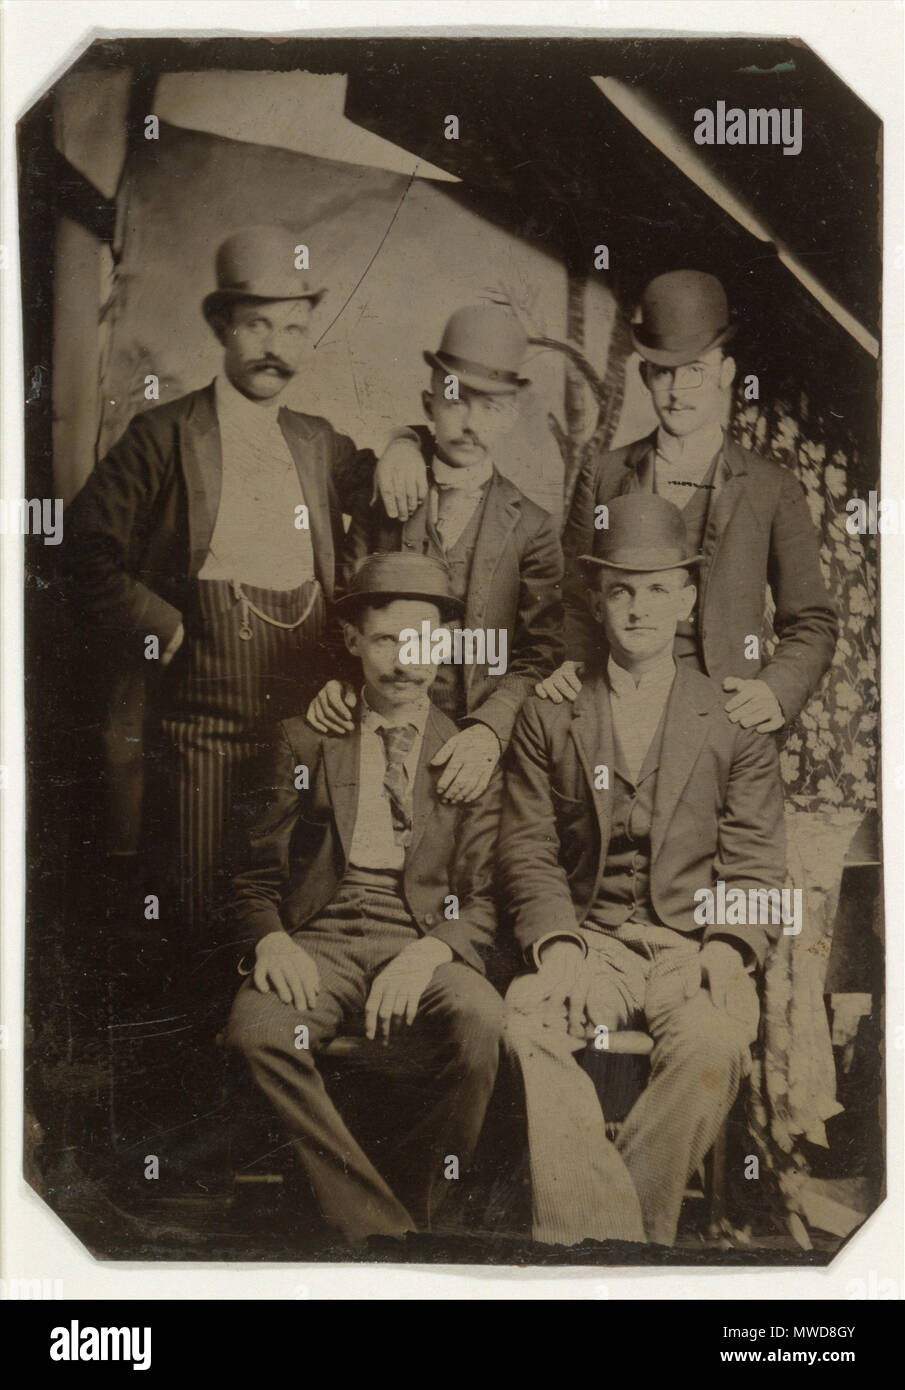 . English: Five Members of the Wild Bunch Unknown Artist Date:   ca. 1892 Medium:   Tintype Dimensions:   Image: 8.4 x 6.2 cm (3 5/16 x 2 7/16 in.) Classification:   Photographs Credit Line:   Gilman Collection, Gift of The Howard Gilman Foundation, 2005 Accession Number:   2005.100.111 This artwork is not on display   Description The Wild Bunch was the largest and most notorious band of outlaws in the American West. Led by two gunmen better known by their aliases, Butch Cassidy (Robert LeRoy Parker) and Kid Curry (Harvey Logan), the Wild Bunch was an informal trust of thieves and rustlers tha Stock Photo